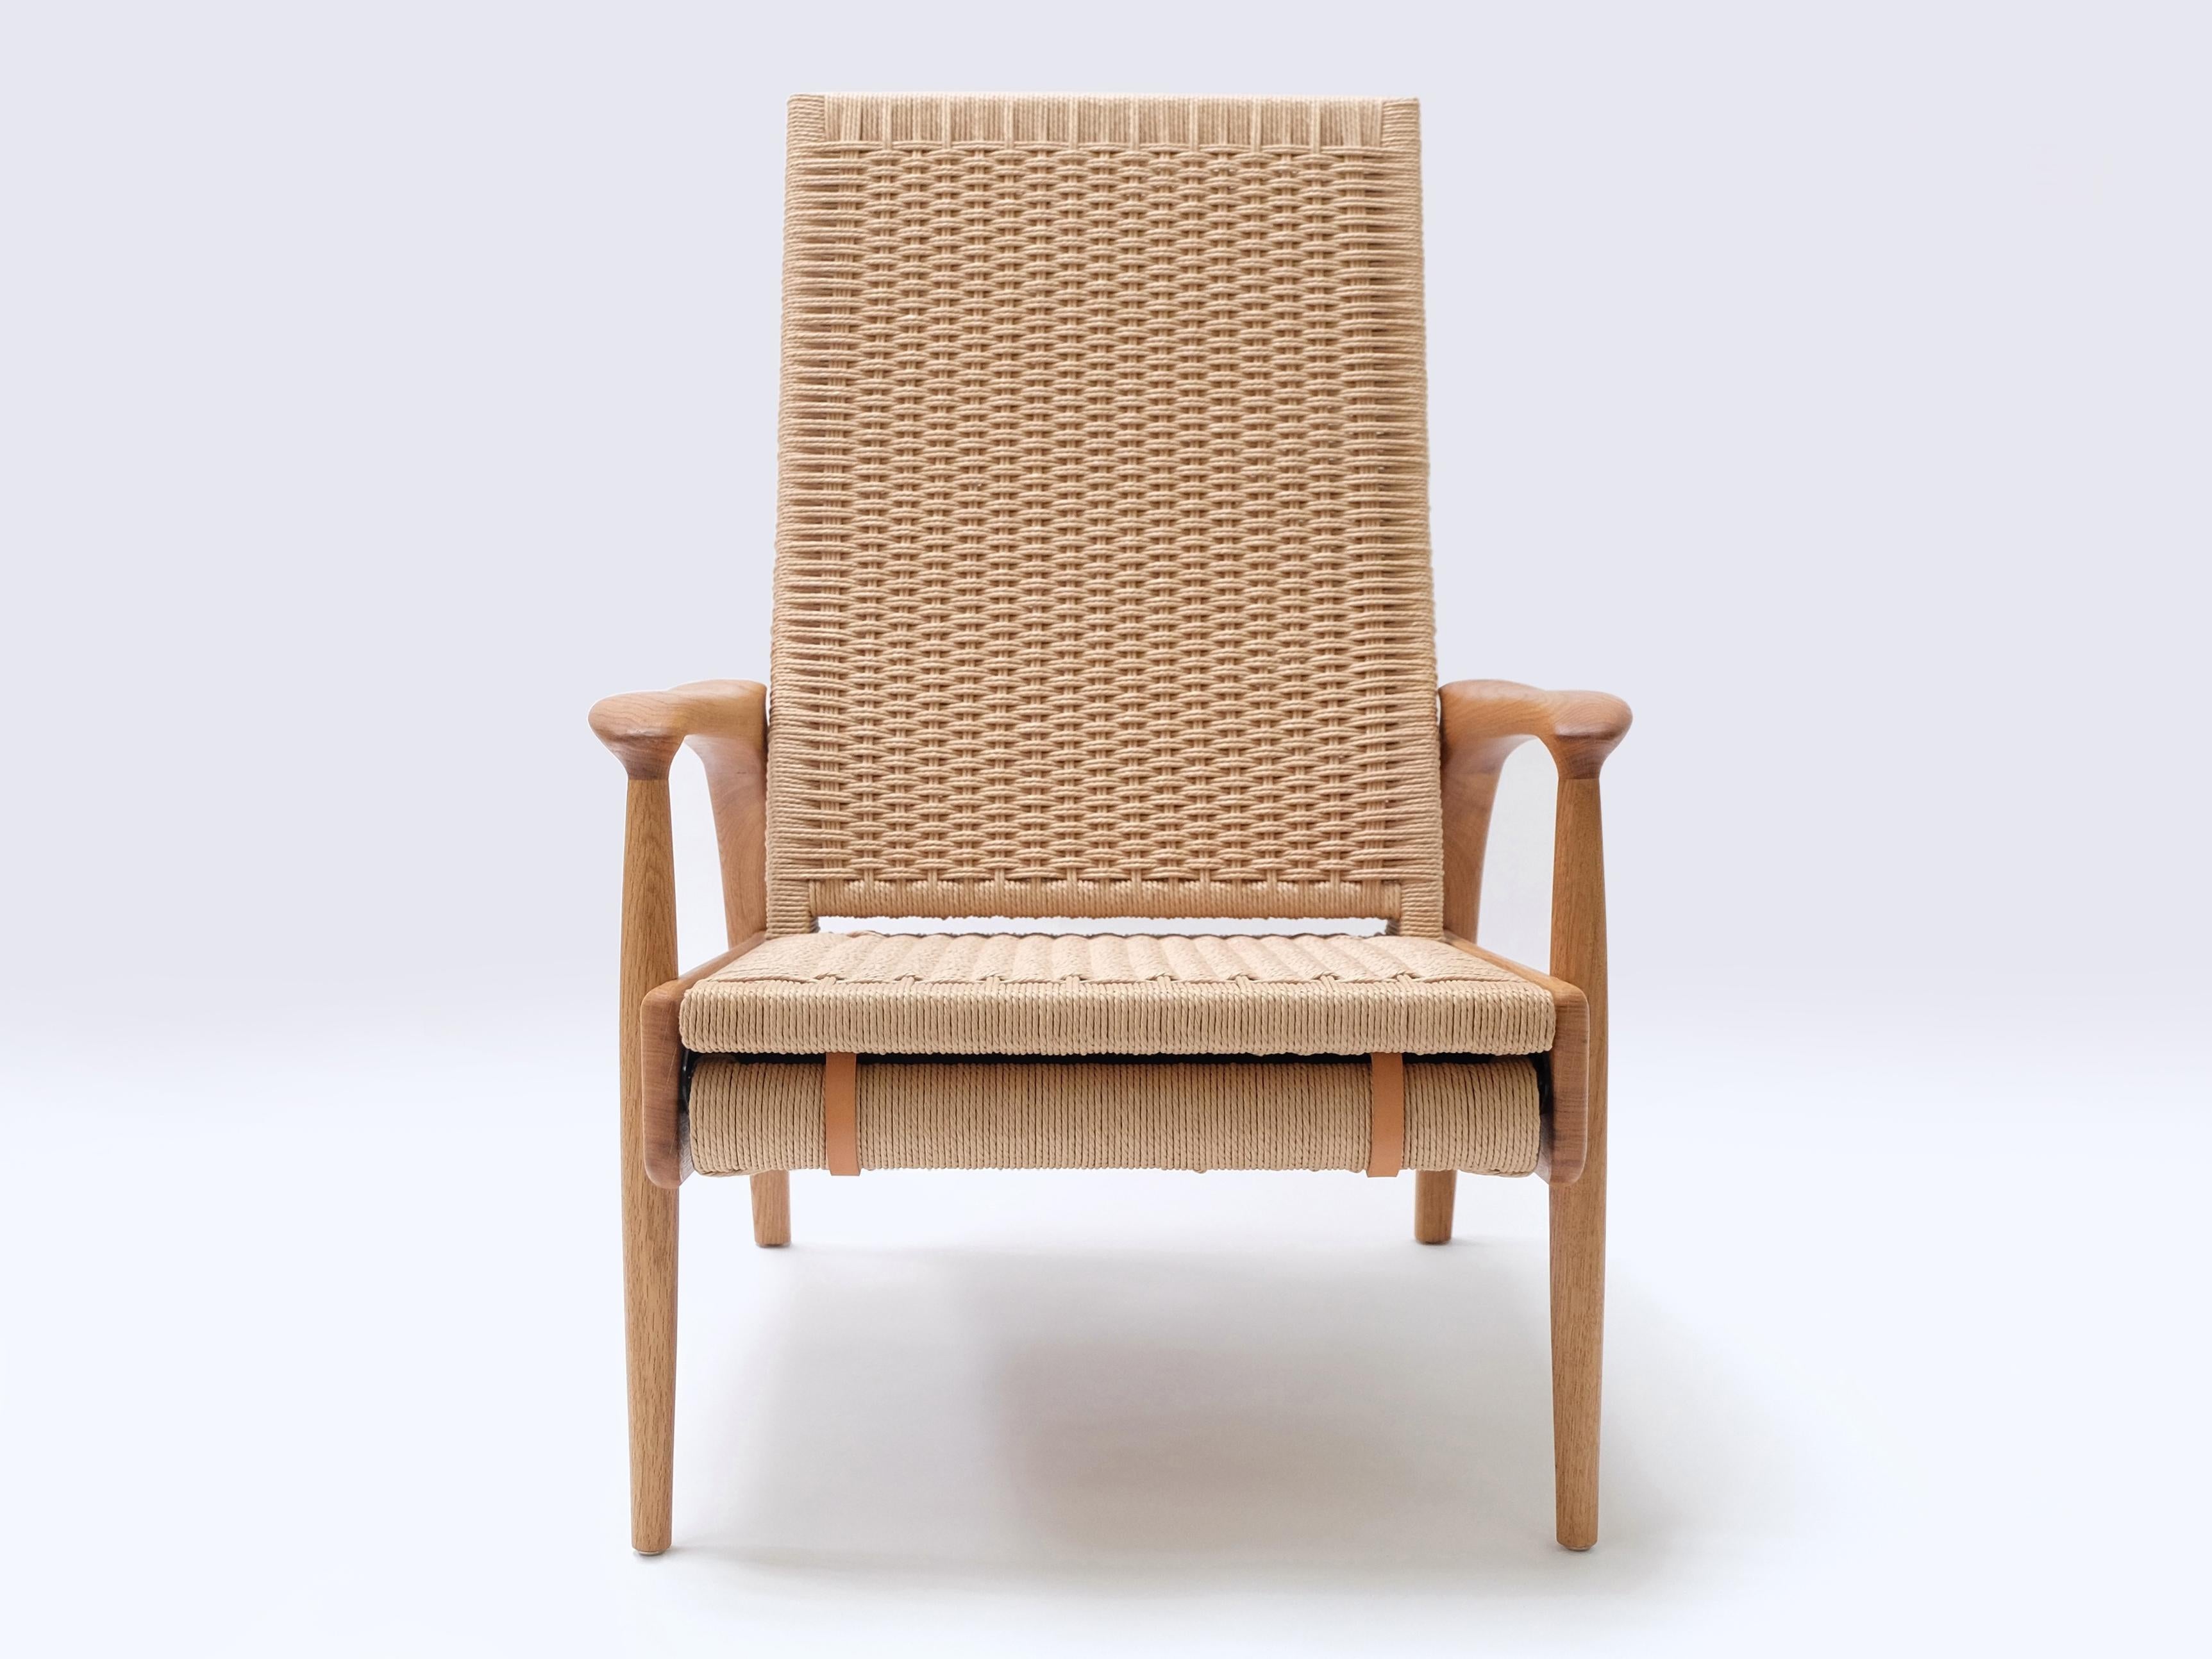 Pair of Custom-Made Handcrafted Reclining Eco Lounge Chairs FENDRIK by Studio180degree
Shown in Sustainable Solid Natural Oiled Oak and Original Natural Danish Cord

Noble - Tactile – Refined - Sustainable
Reclining Eco Lounge Chair FENDRIK is a